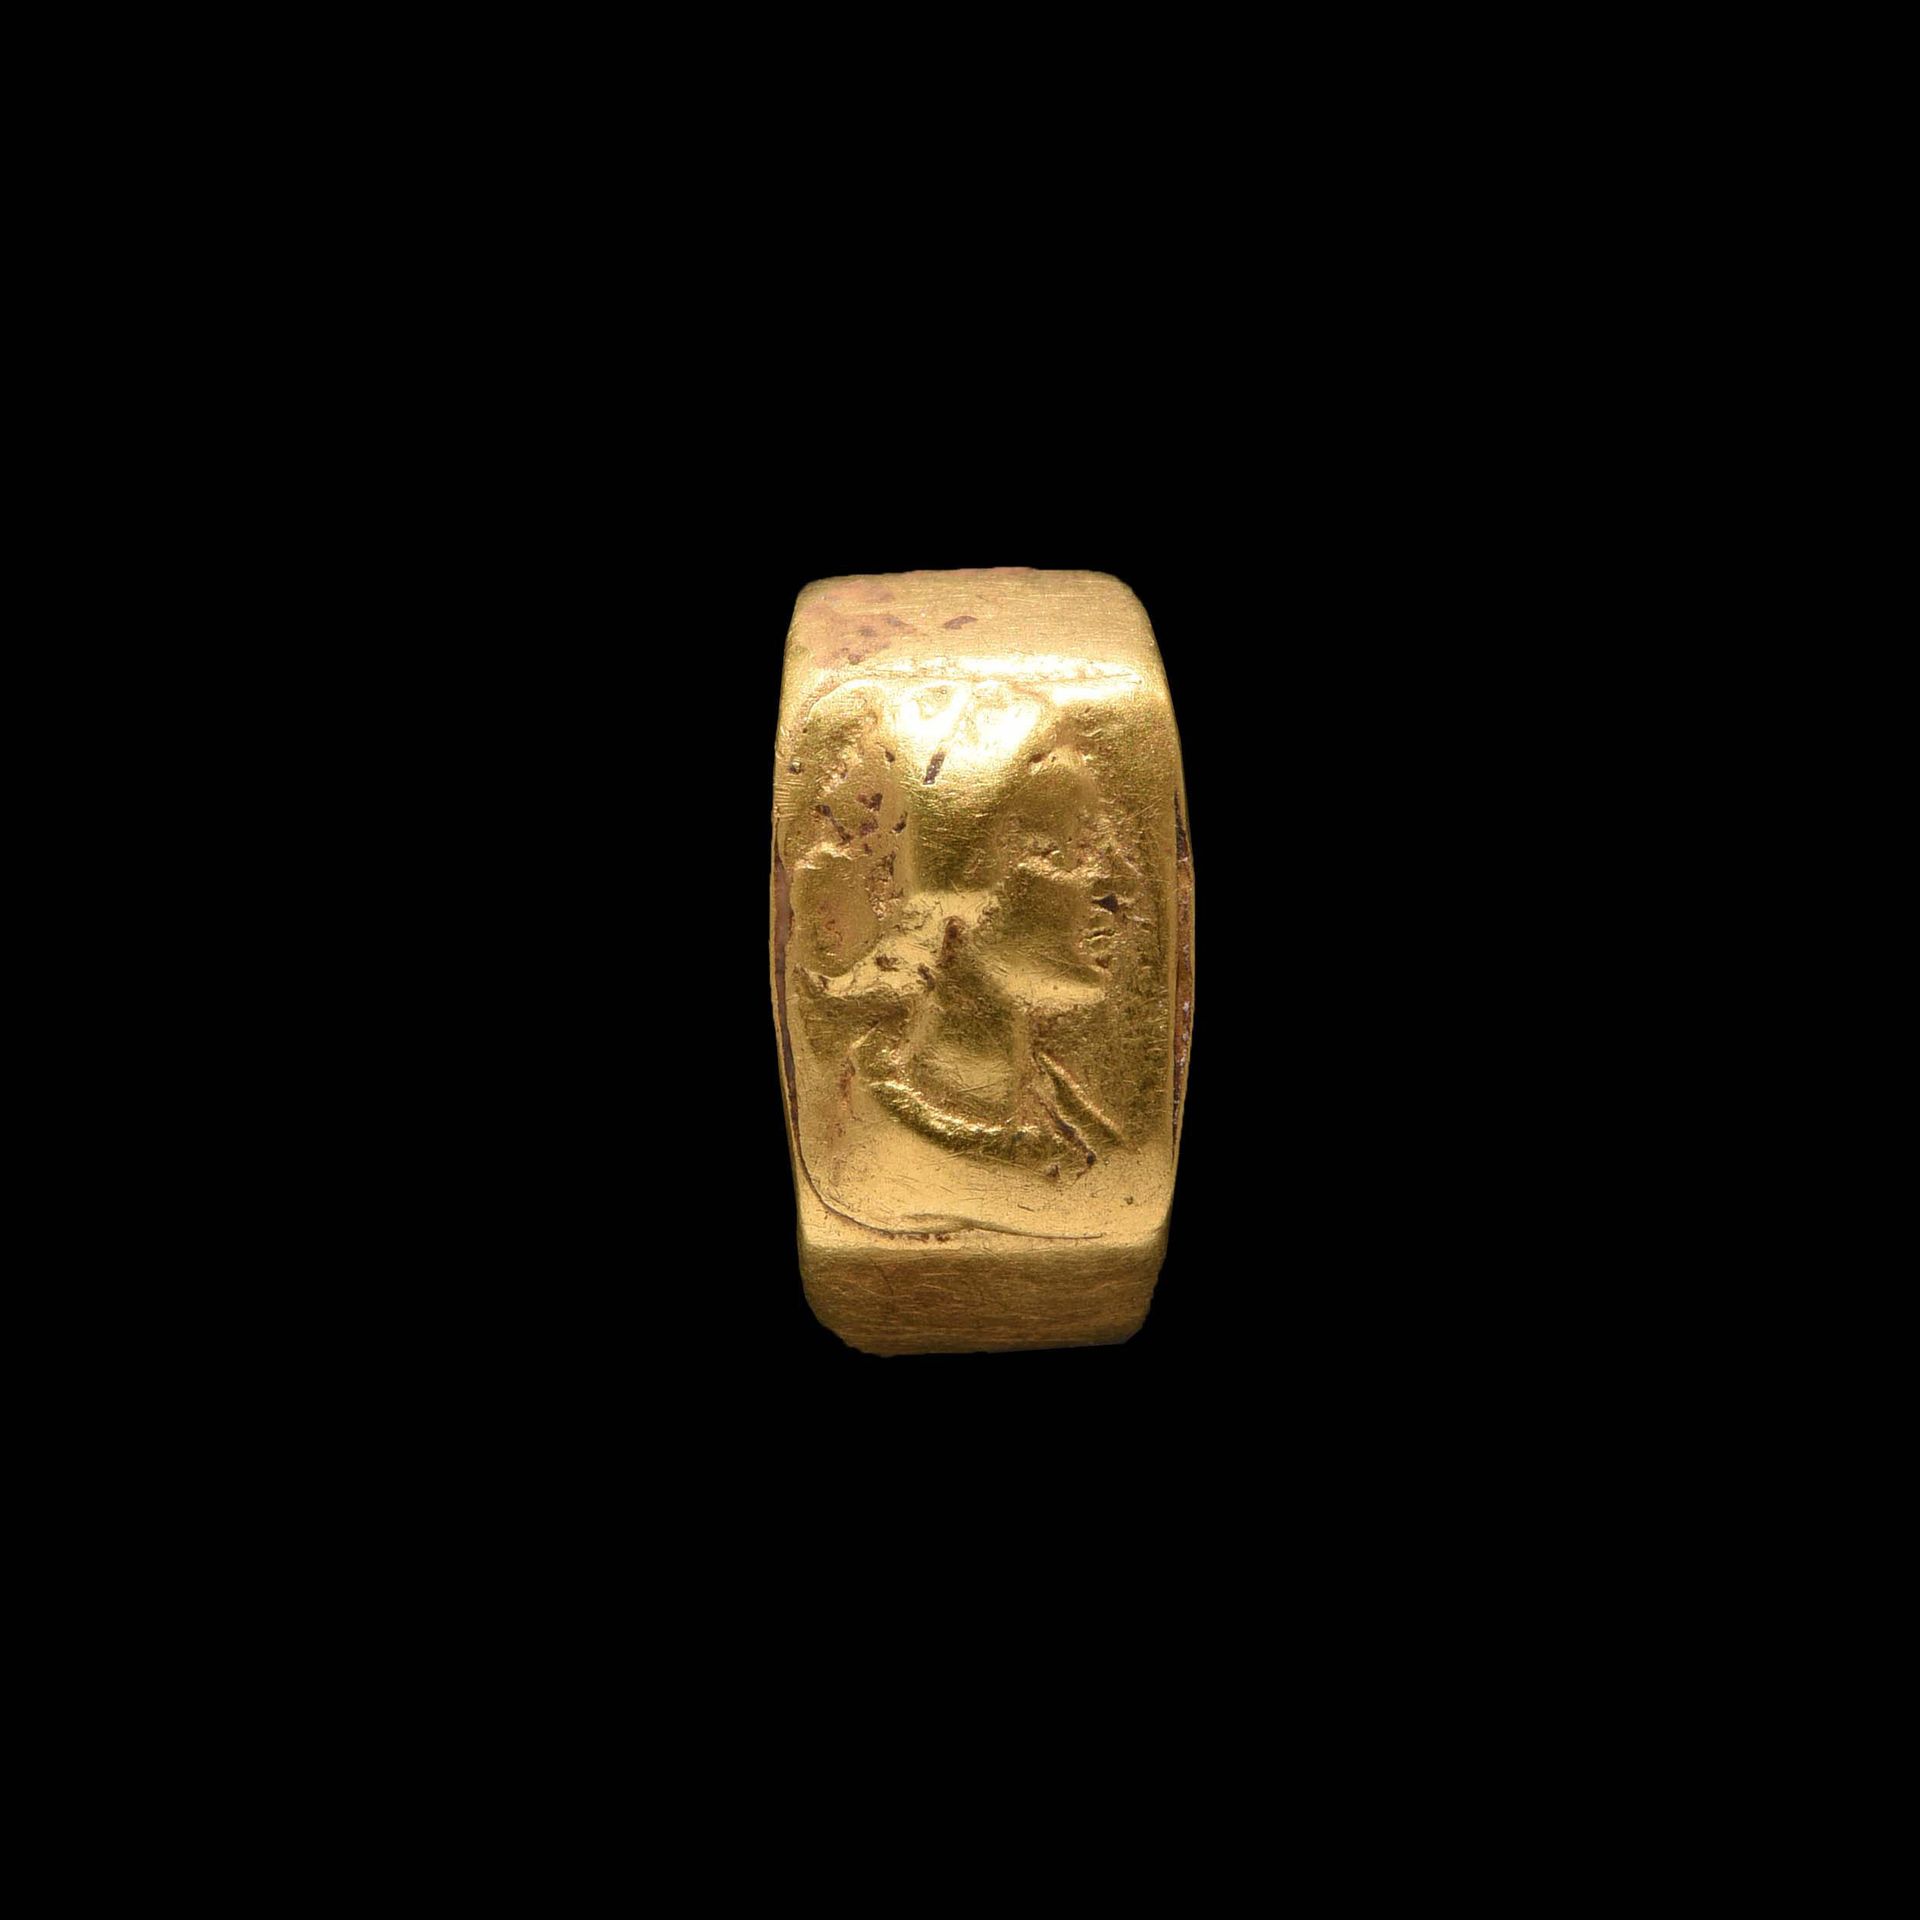 Null RING

Roman art, 1st - 2nd century.

Made of gold plate, the ring faceted. &hellip;